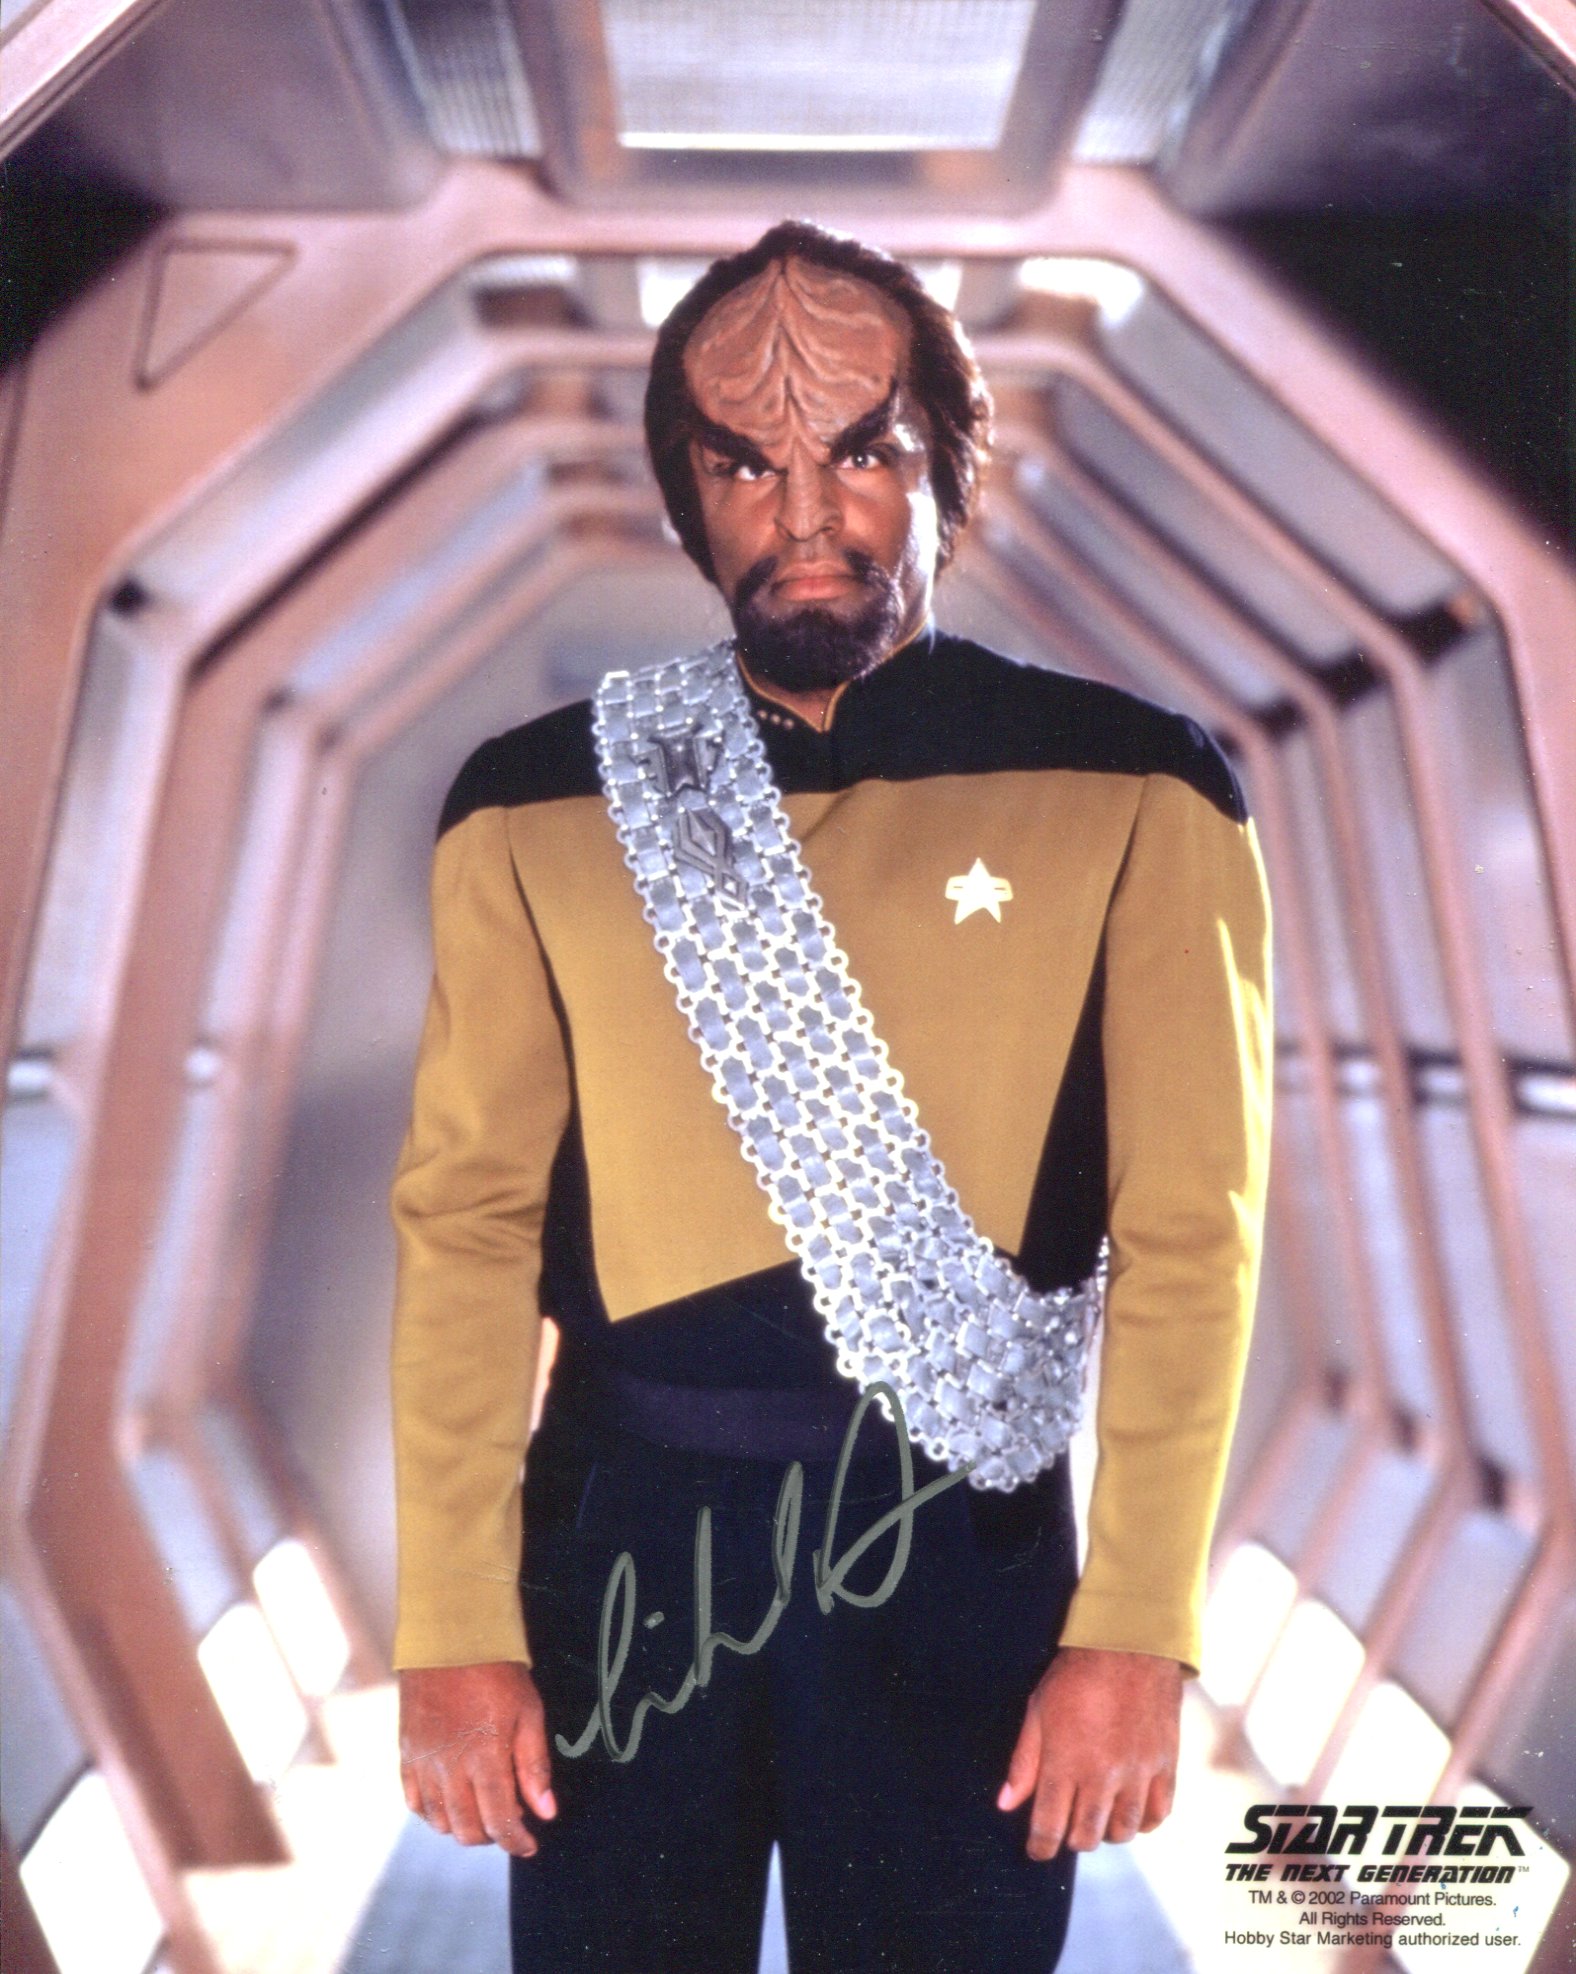 Star Trek The Next Generation 8x10 photo signed by Michael Dorn as Lt Worf. Good Condition. All